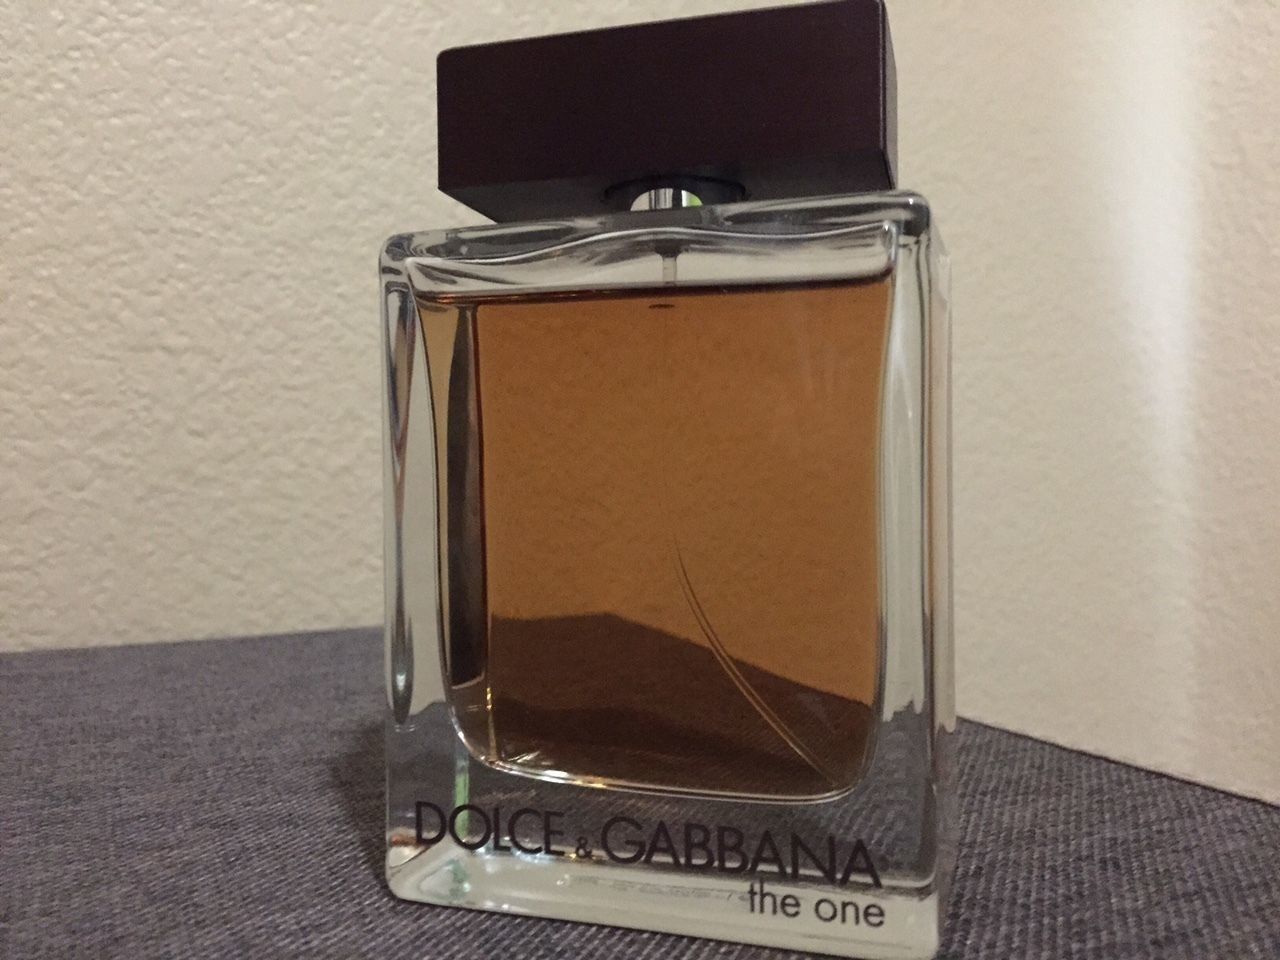 Dolce & Gabbana The One Cologne 150ml | Grailed